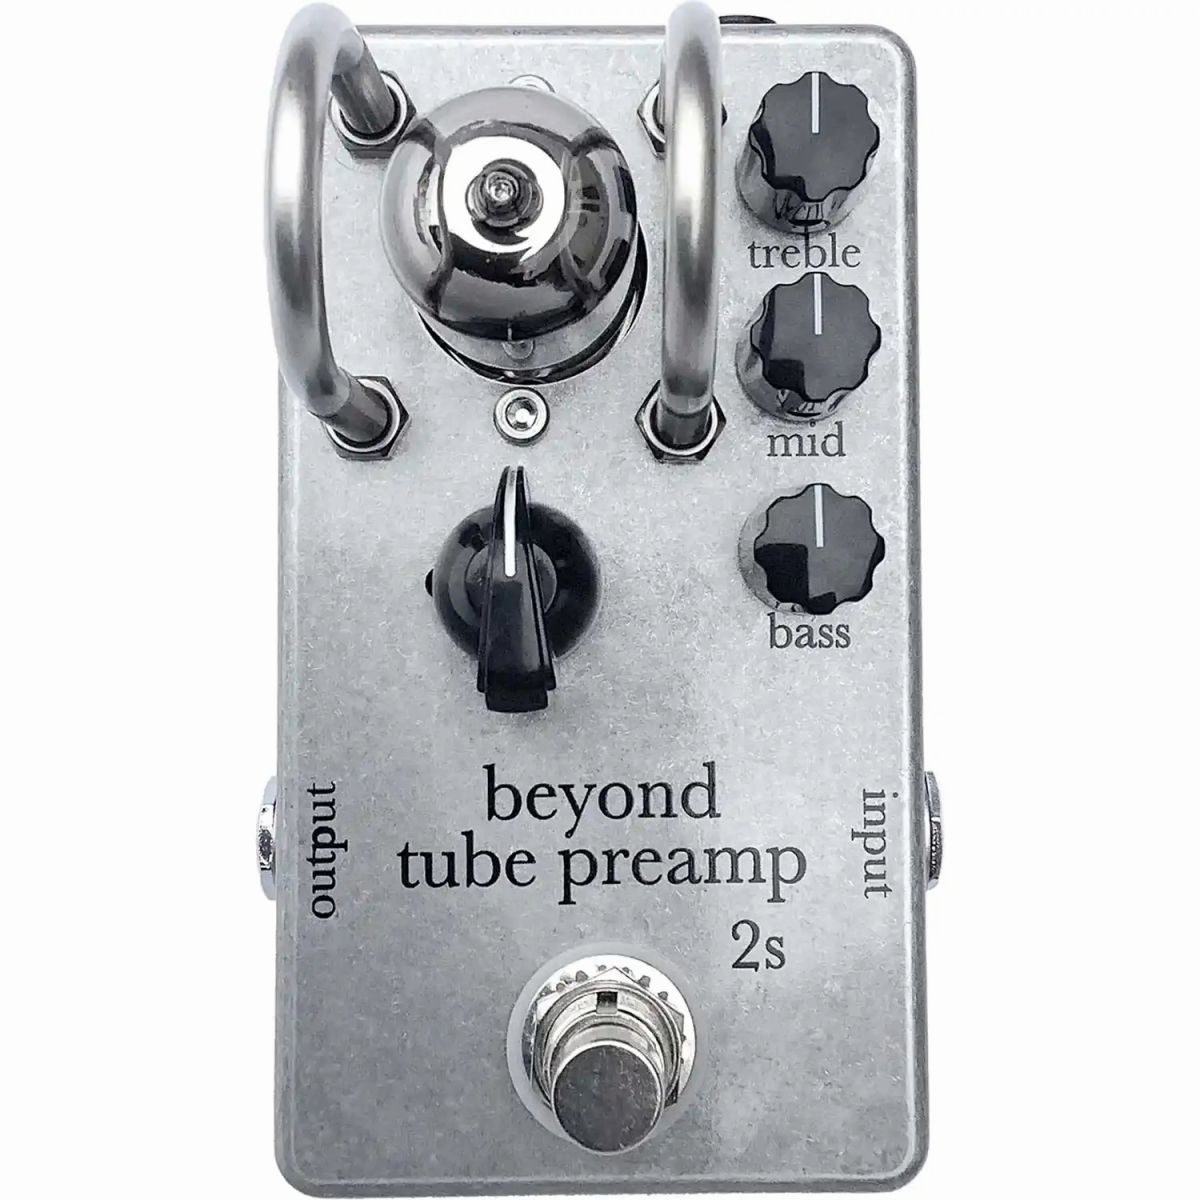 Things Beyond tube preamp 2s エレキギター用 真空管プリアンプ 